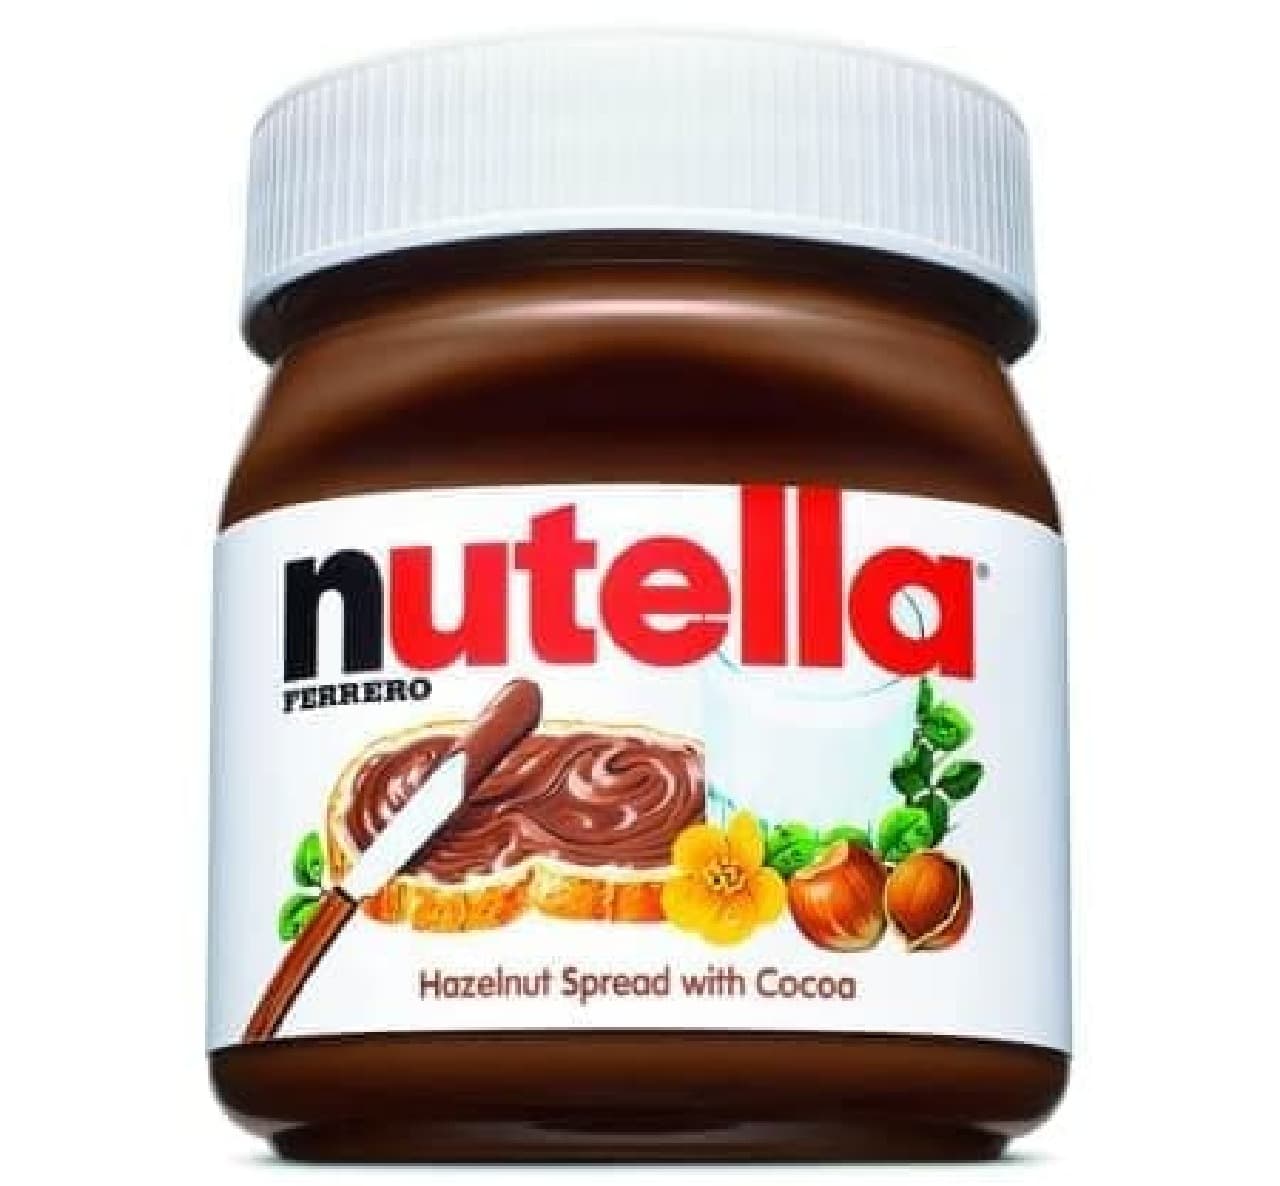 My favorite Nutella and Cronut are the strongest (Source: nutella official website)